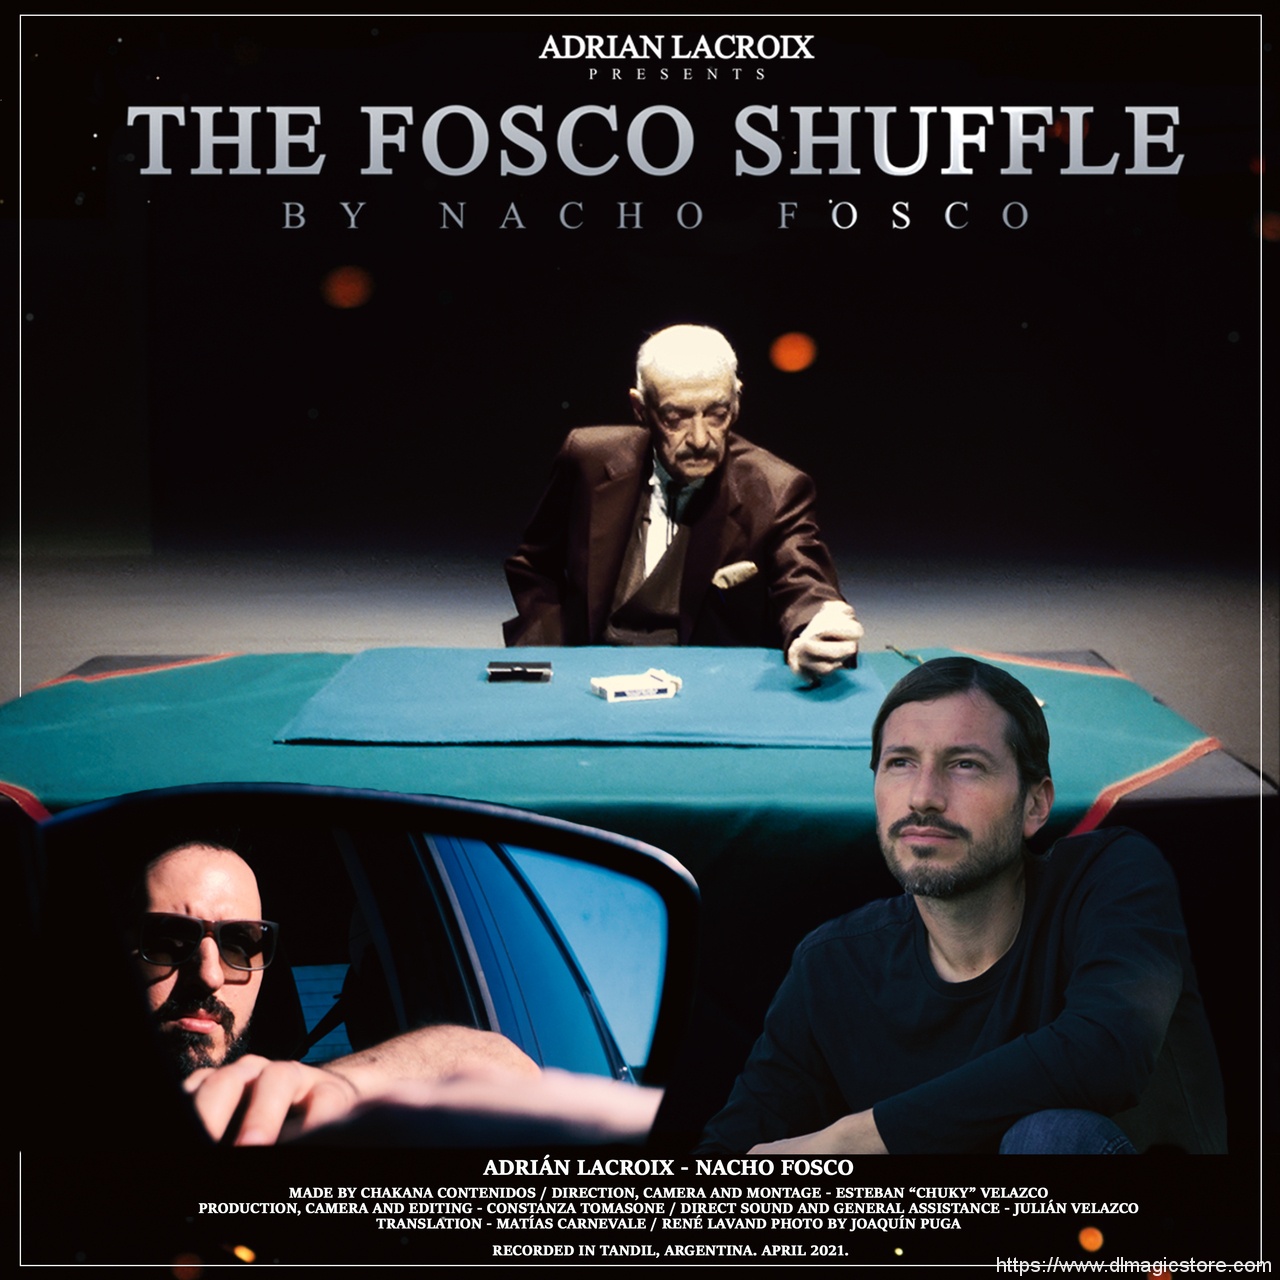 The Fosco Shuffle Presented By Adrian Lacroix (Instant Download)